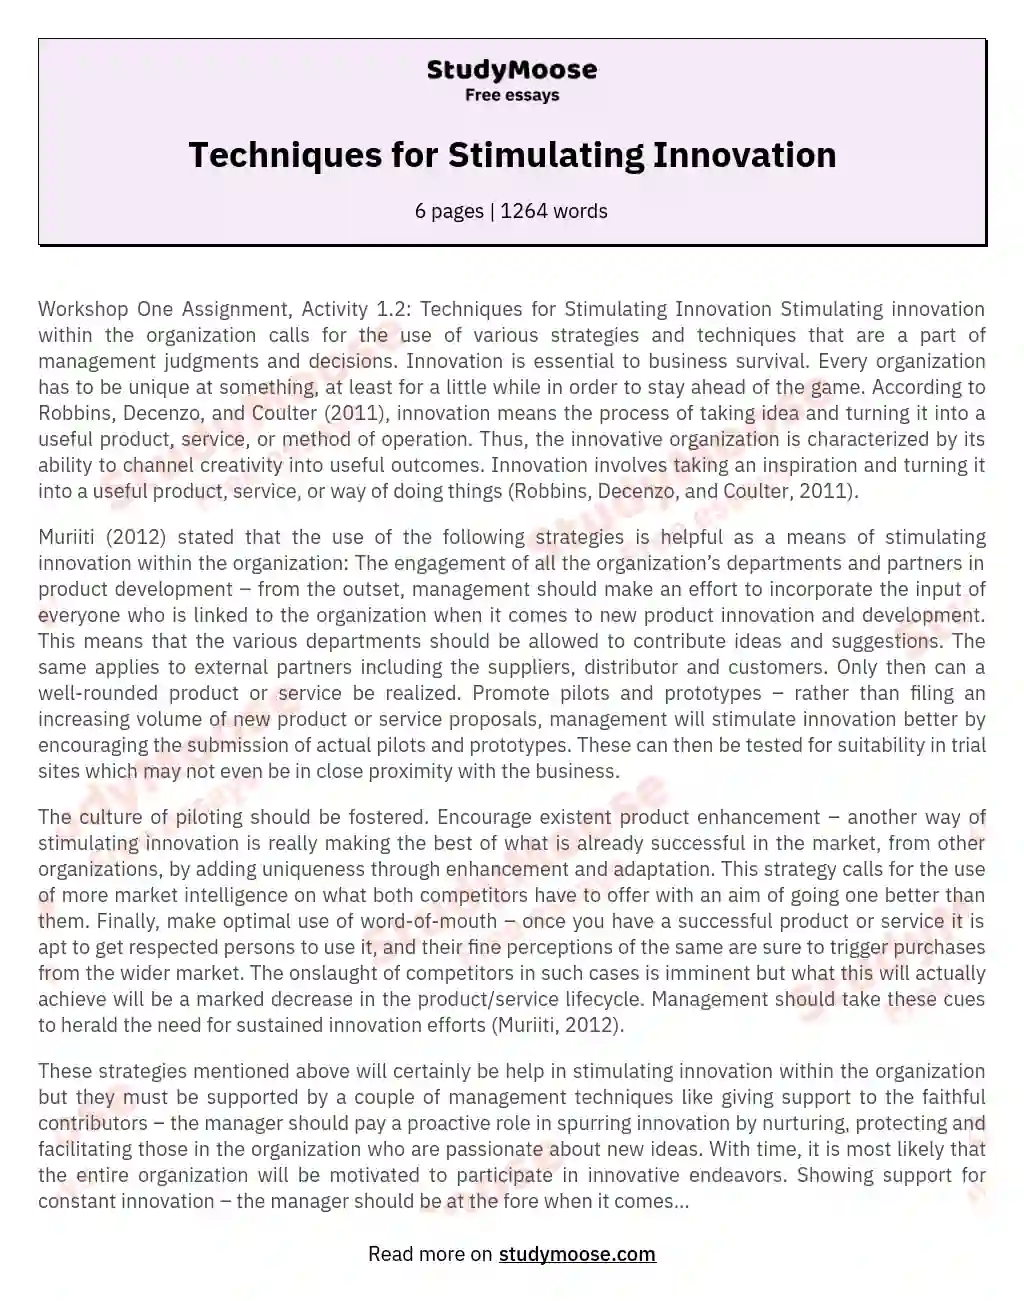 Techniques for Stimulating Innovation essay